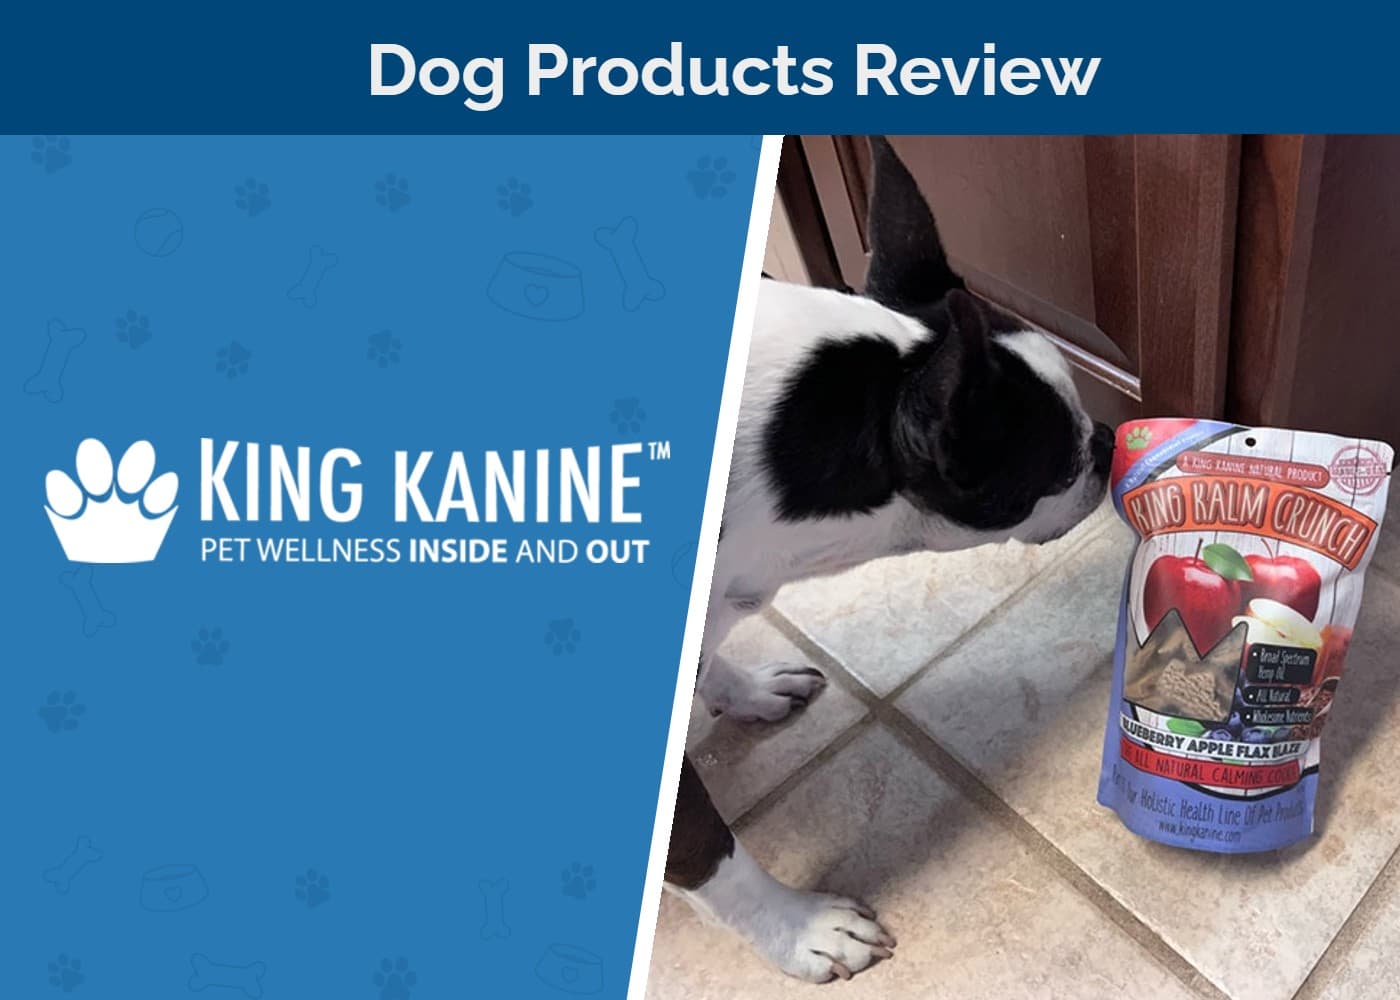 King-kanine-dog-products-review-SAPR-dog-smelling-product